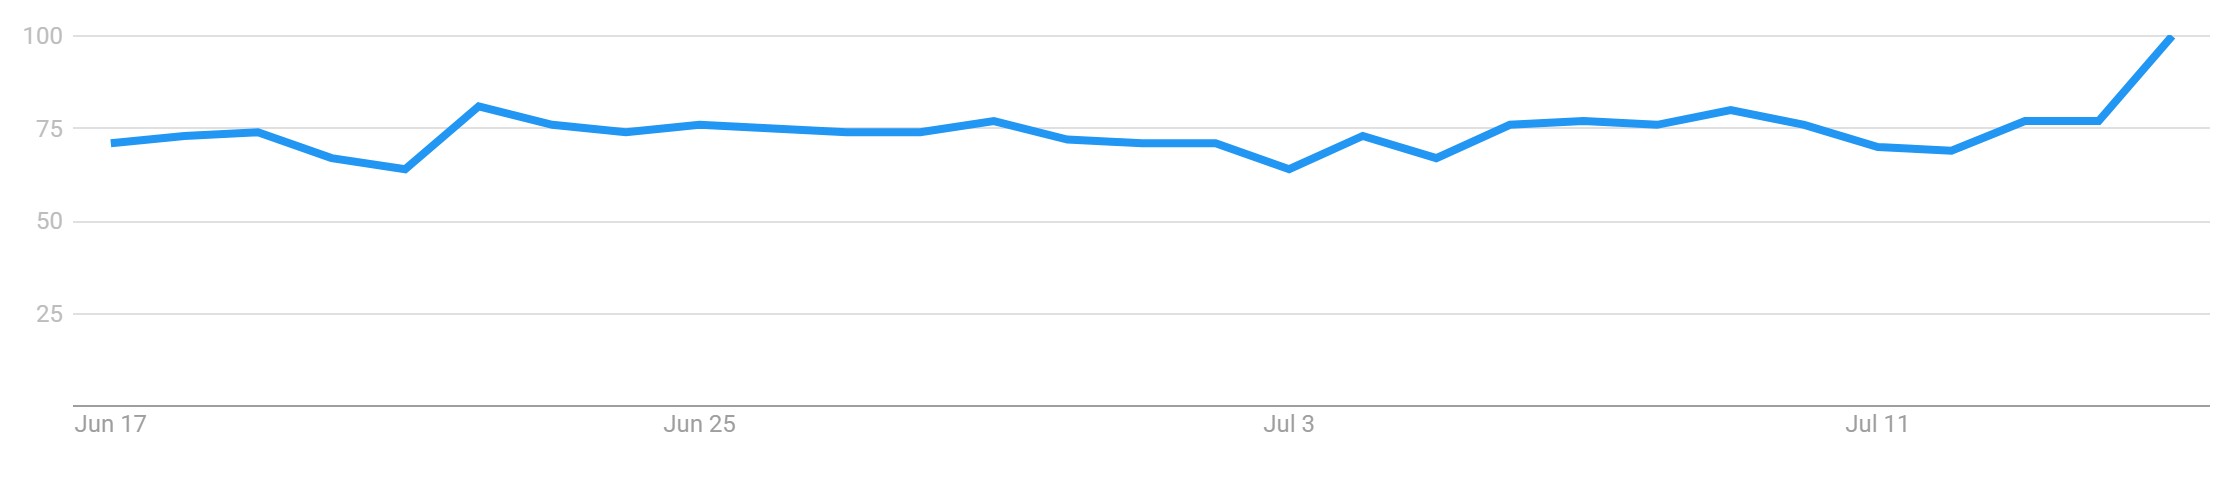 Google Trends data for “Bitcoin” searches. Source: Google Trends.